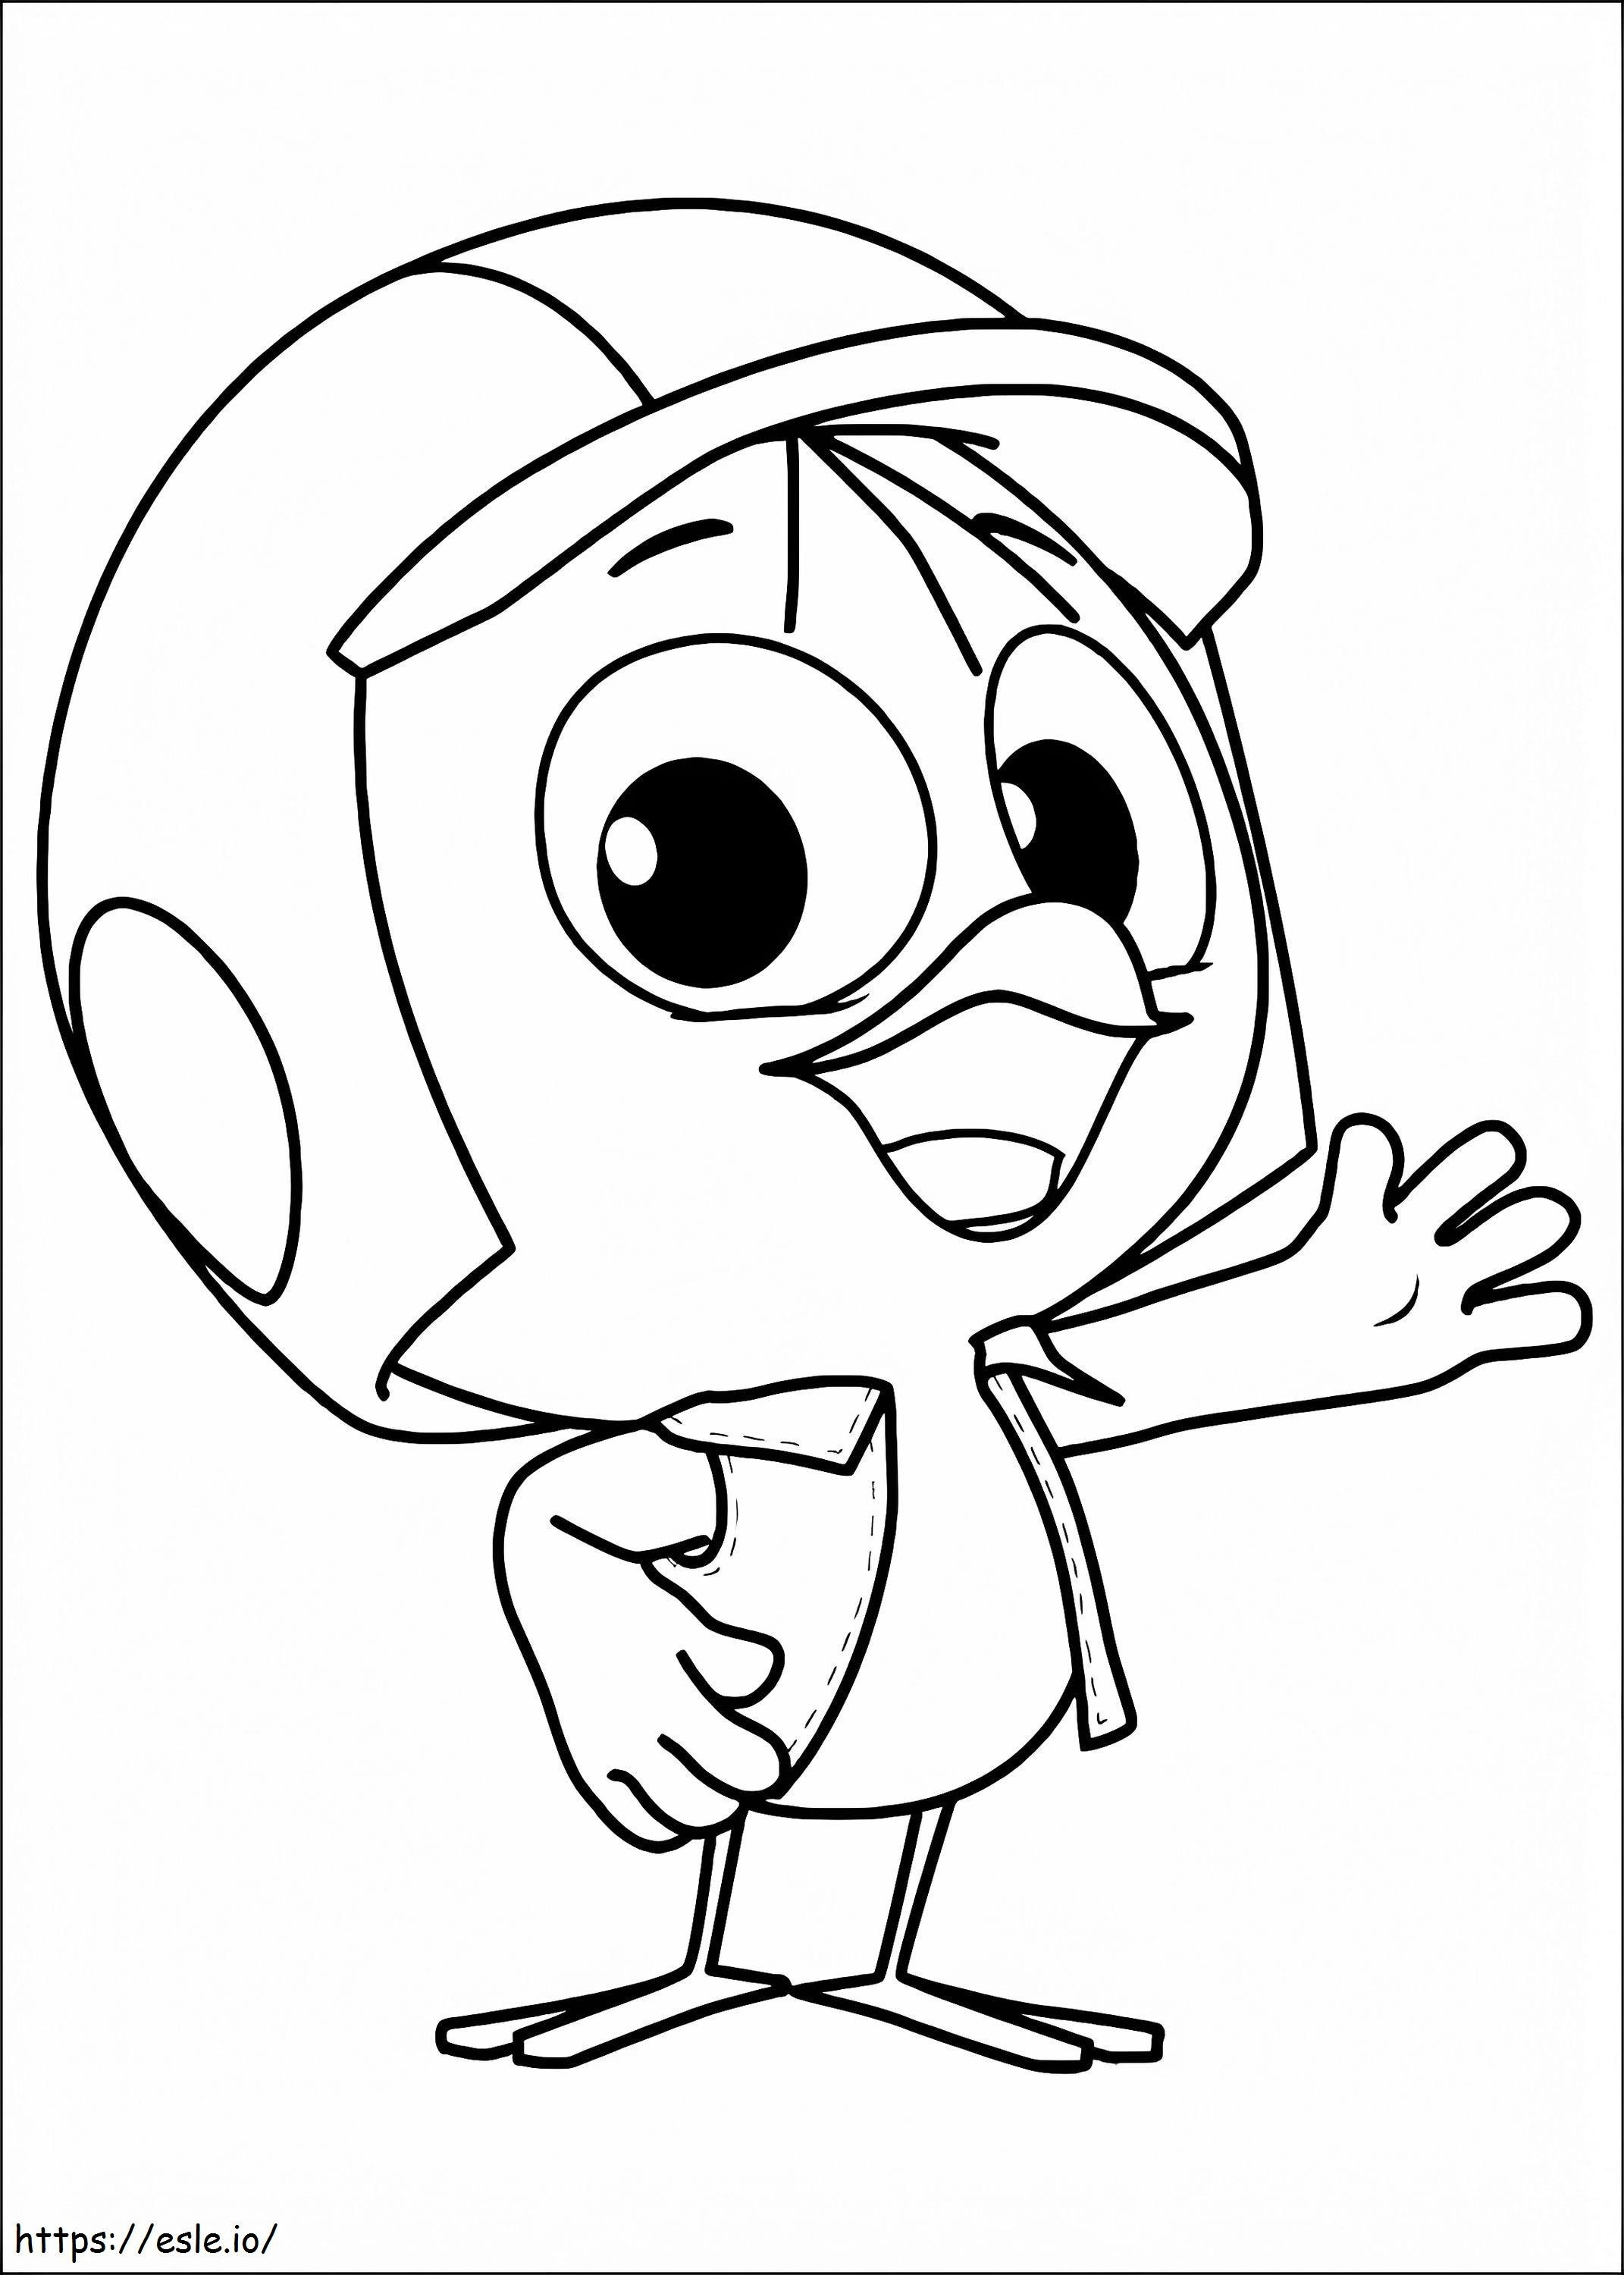 1534387208 Funny Calimero A4 coloring page